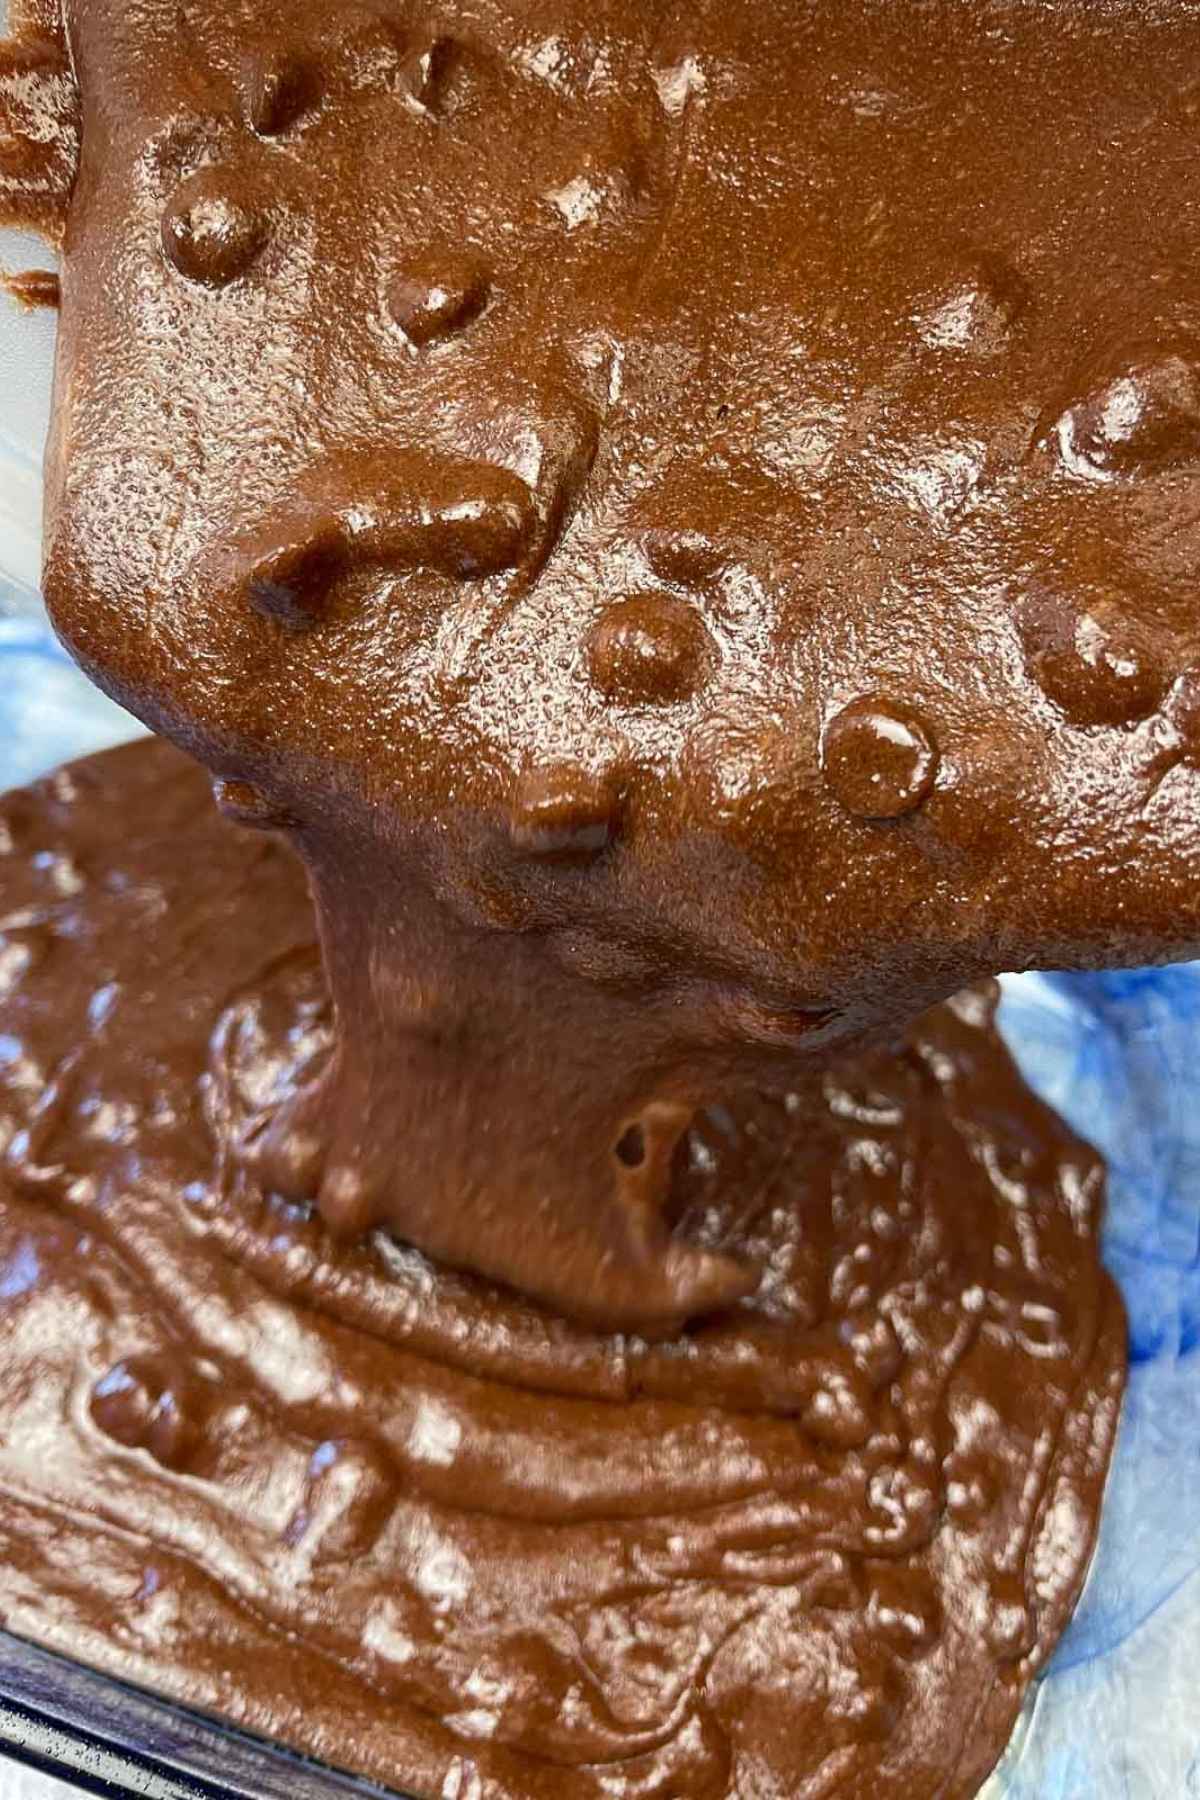 Pouring brownie batter in the baking dish.